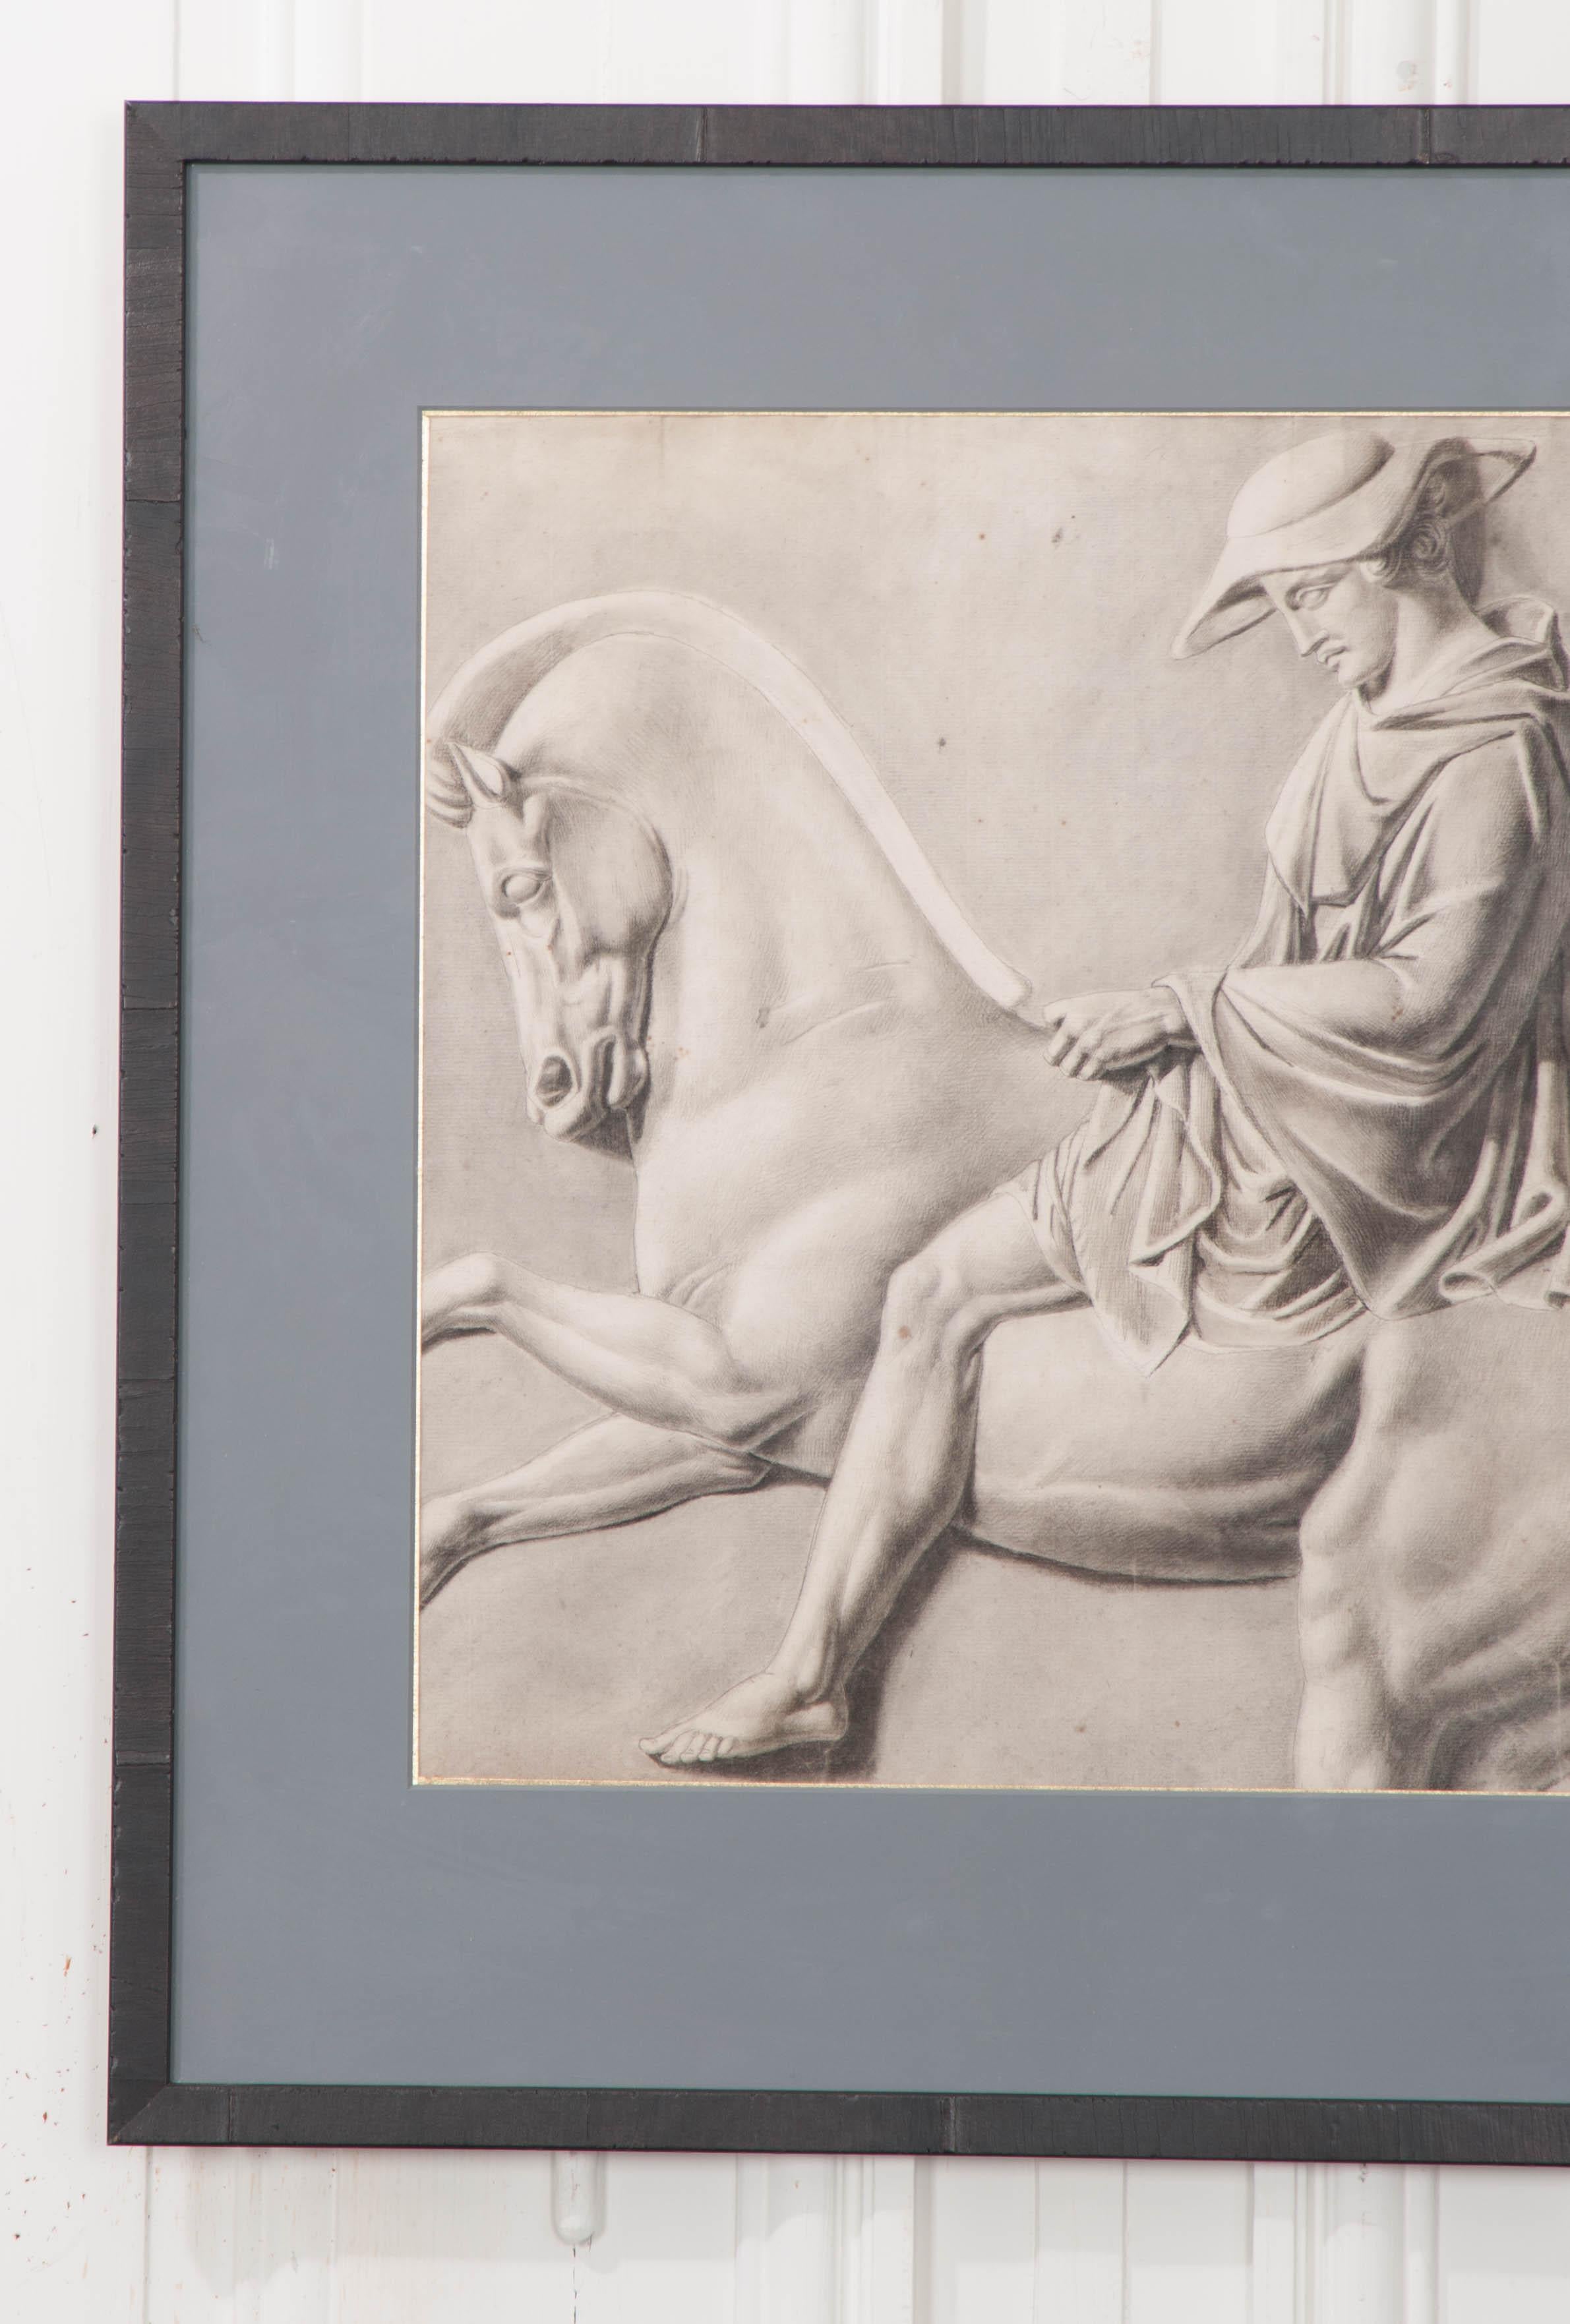 This well-executed charcoal drawing, circa 1940s, is a study of a marble monument, likely by an art student. It is presented in a grey mat with gold foil liner and ebonized frame.